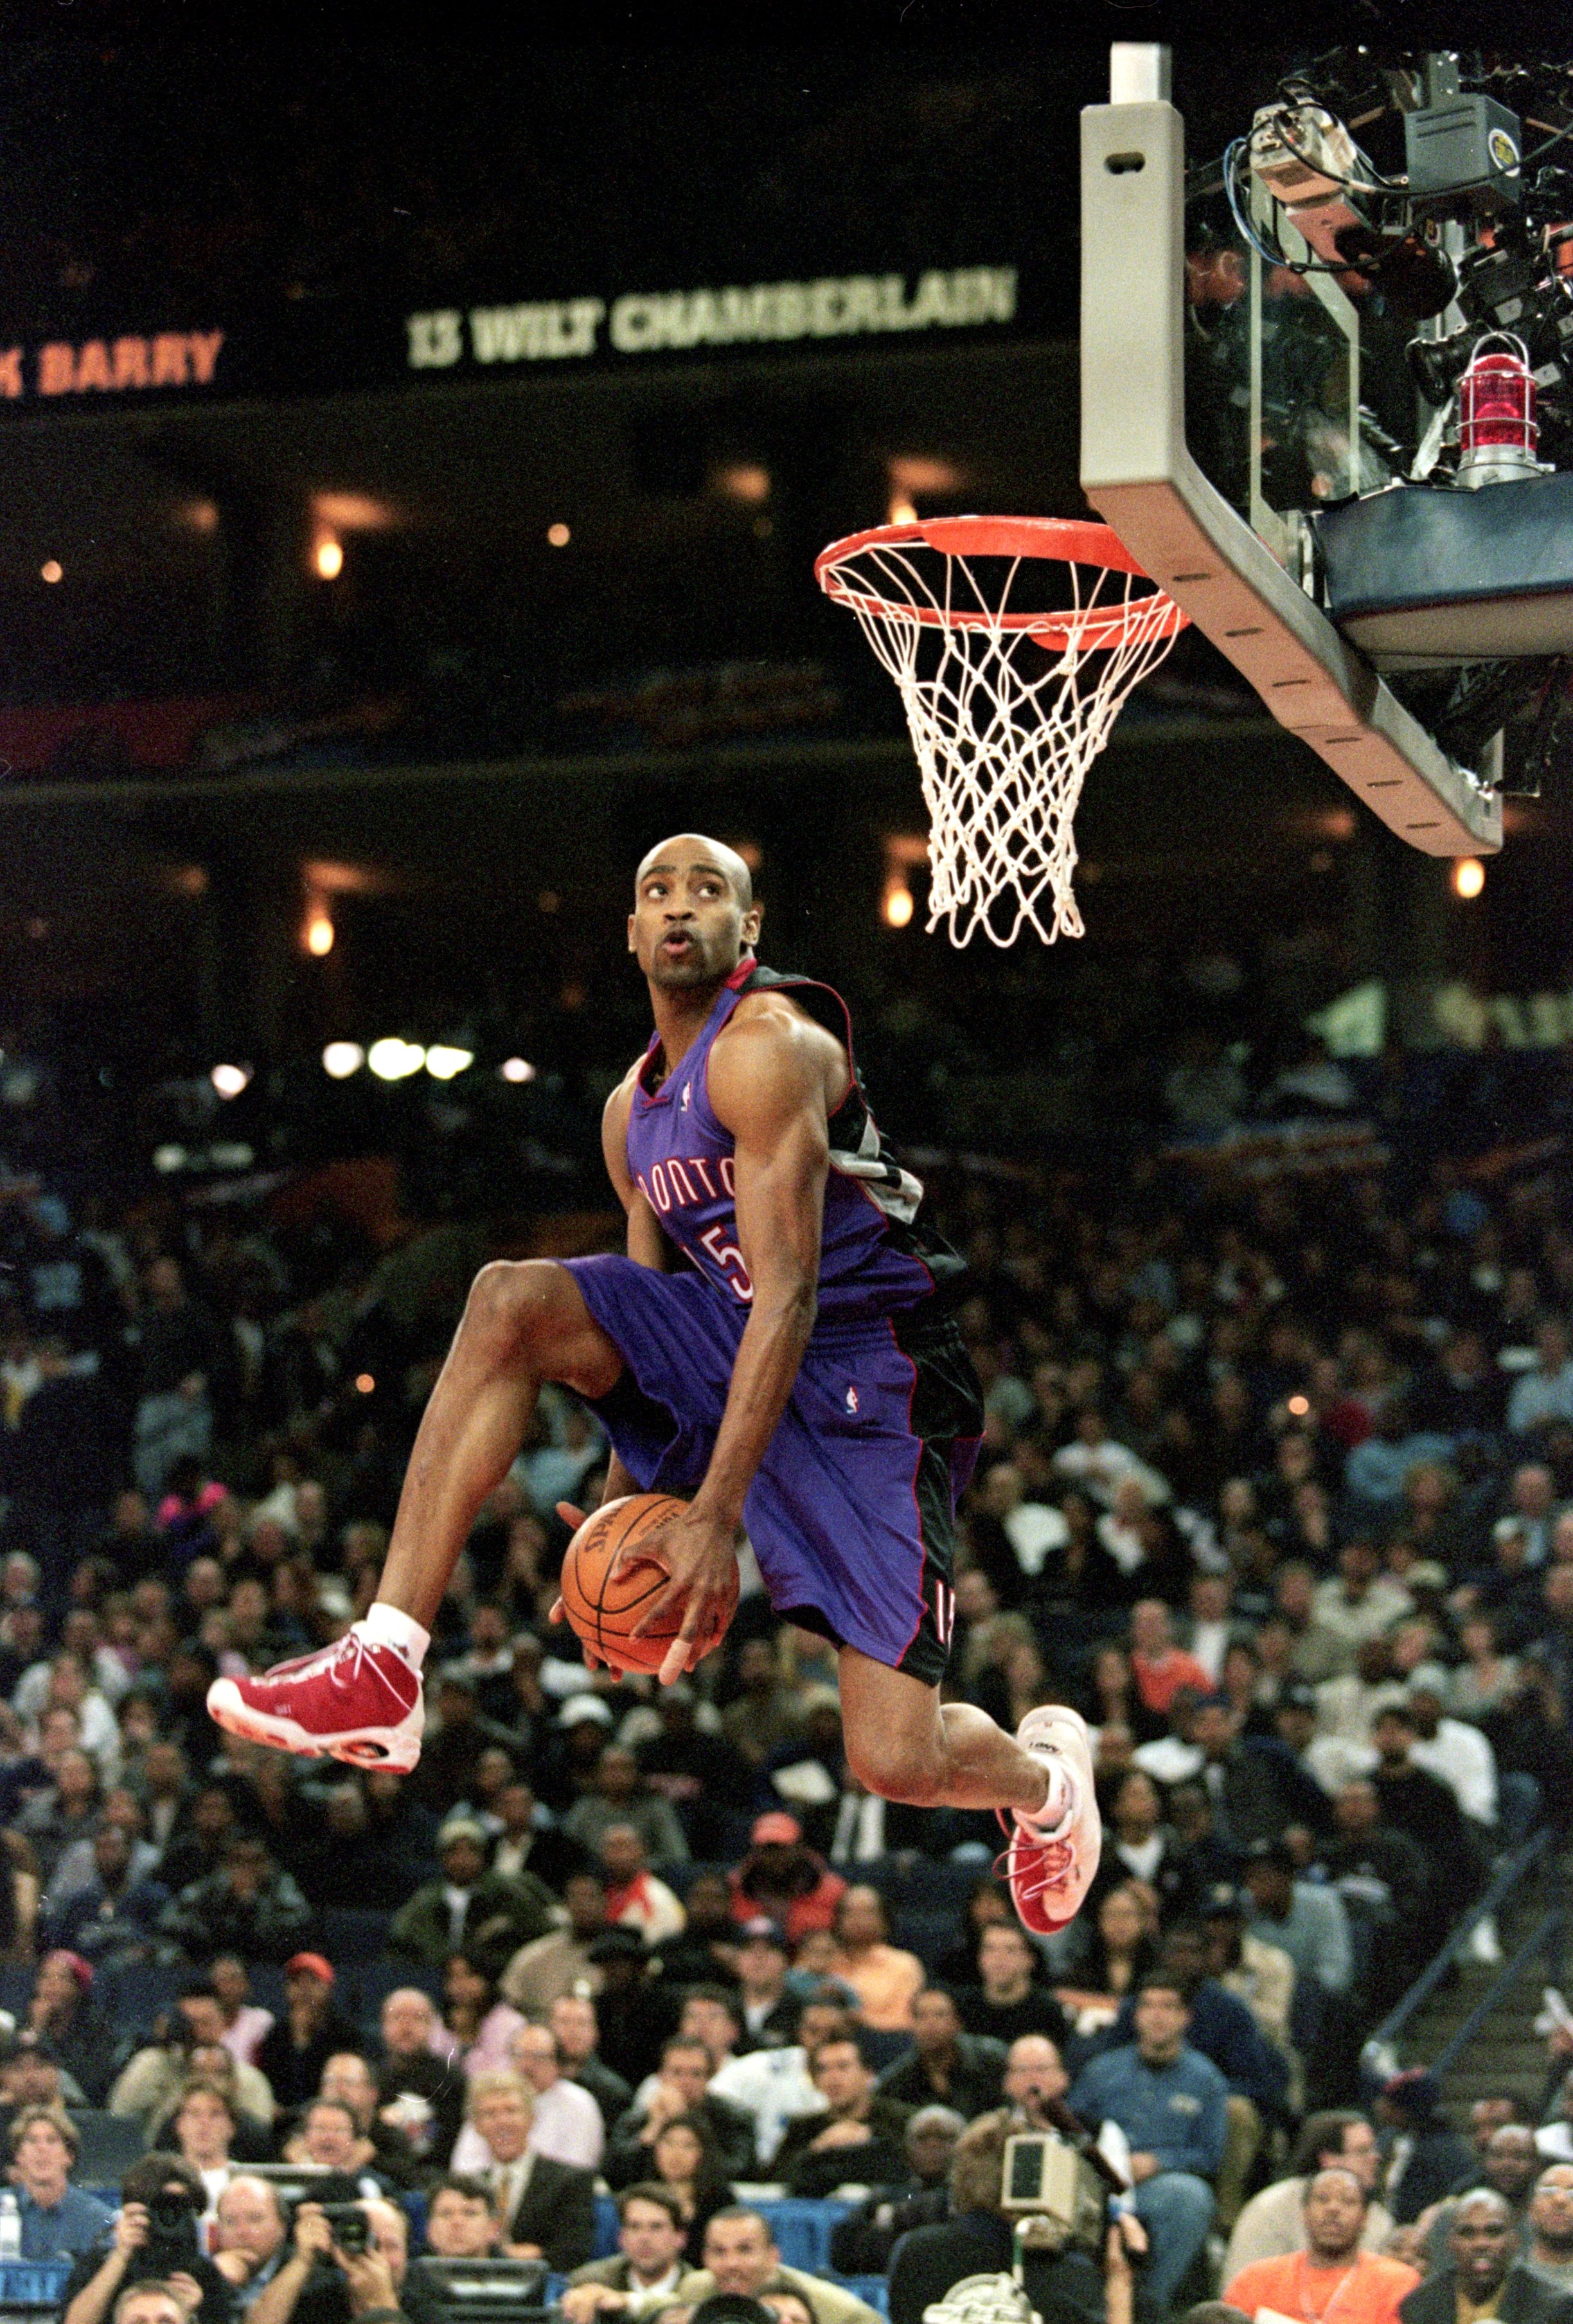 The best photos from Vince Carter’s legendary dunk contest performance